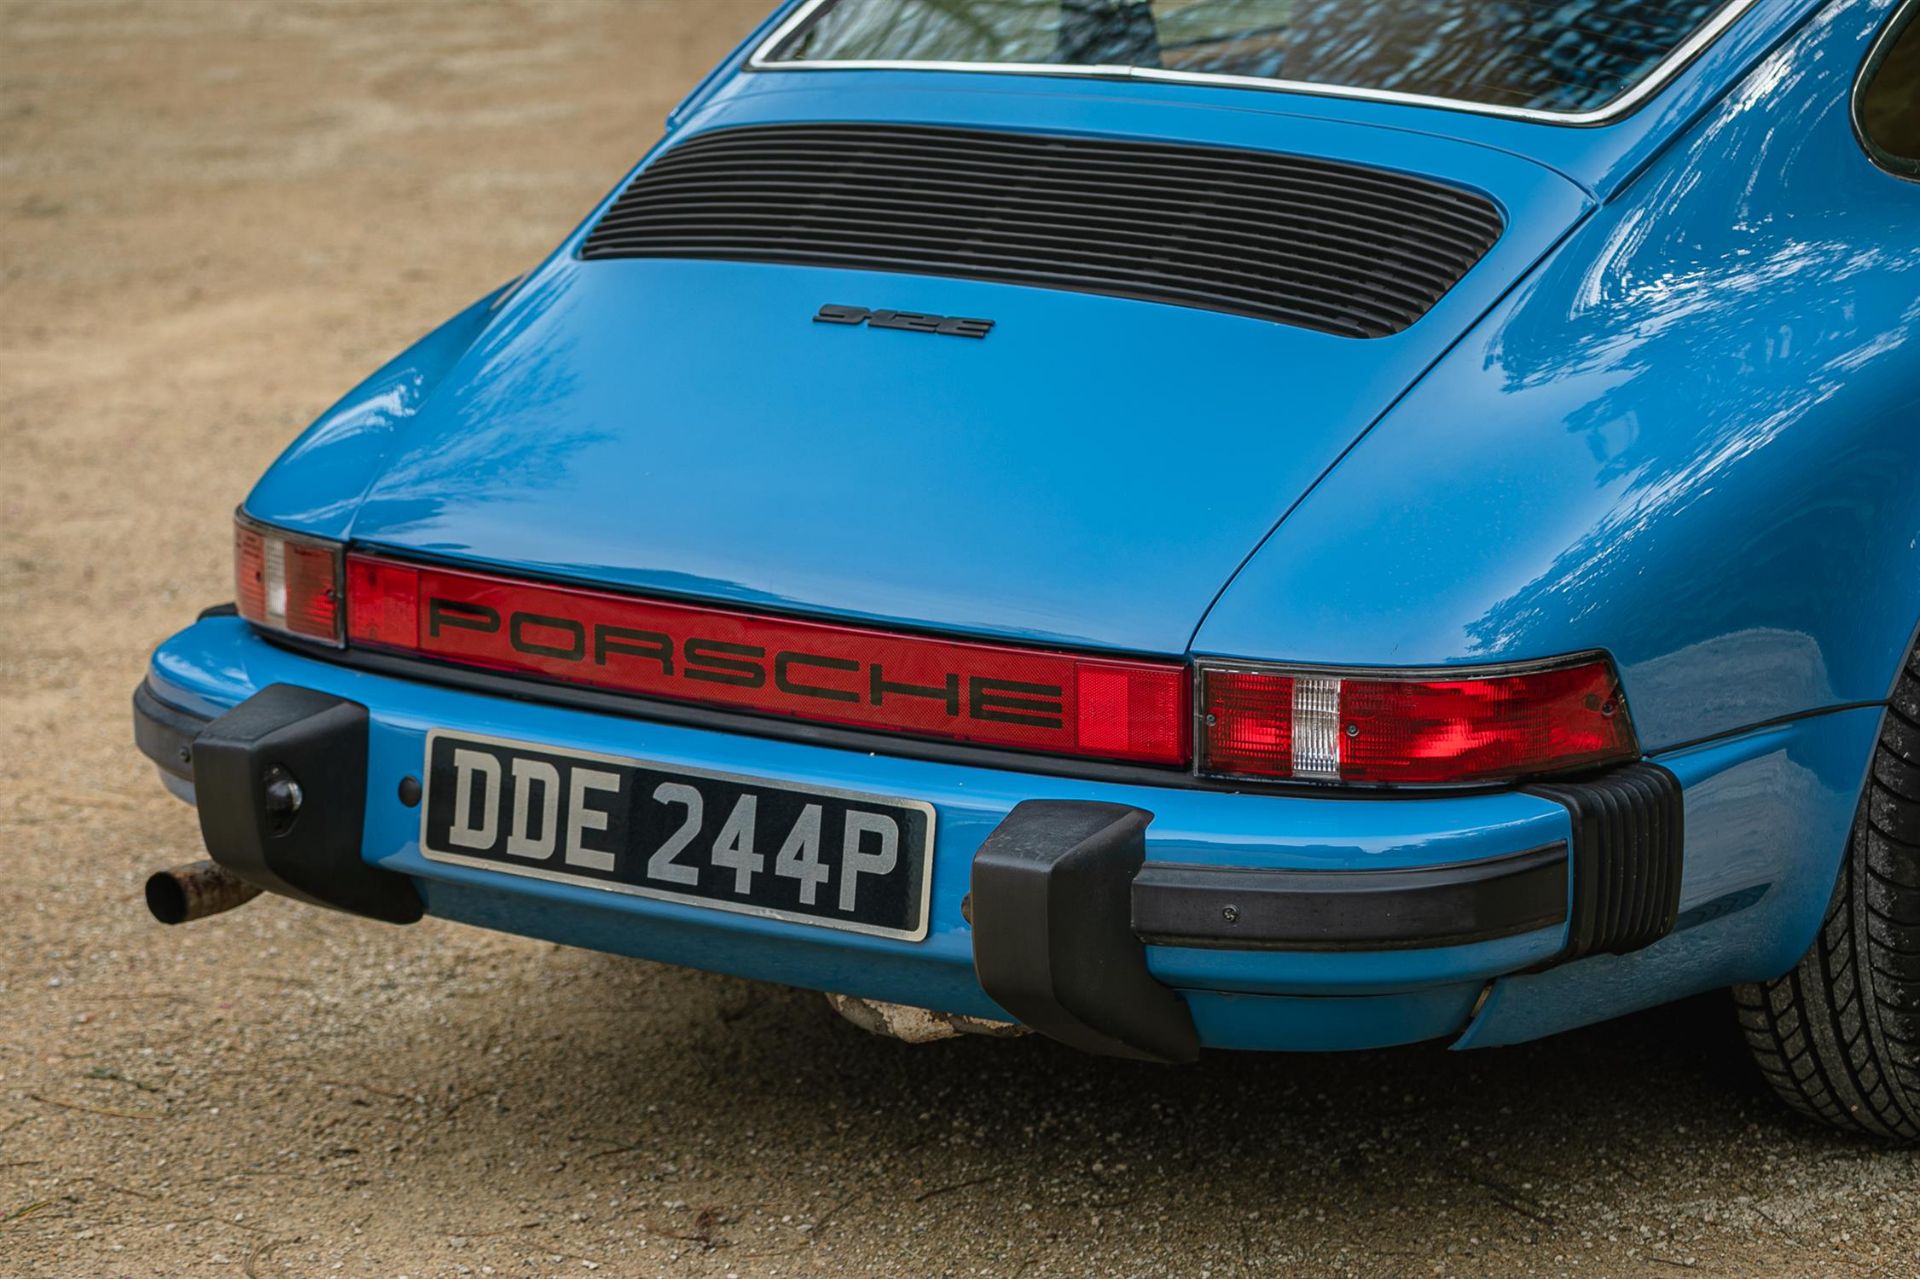 **Sold Pre-Sale**1976 Porsche 912E - Offered Directly From Mike Brewer - Image 8 of 10